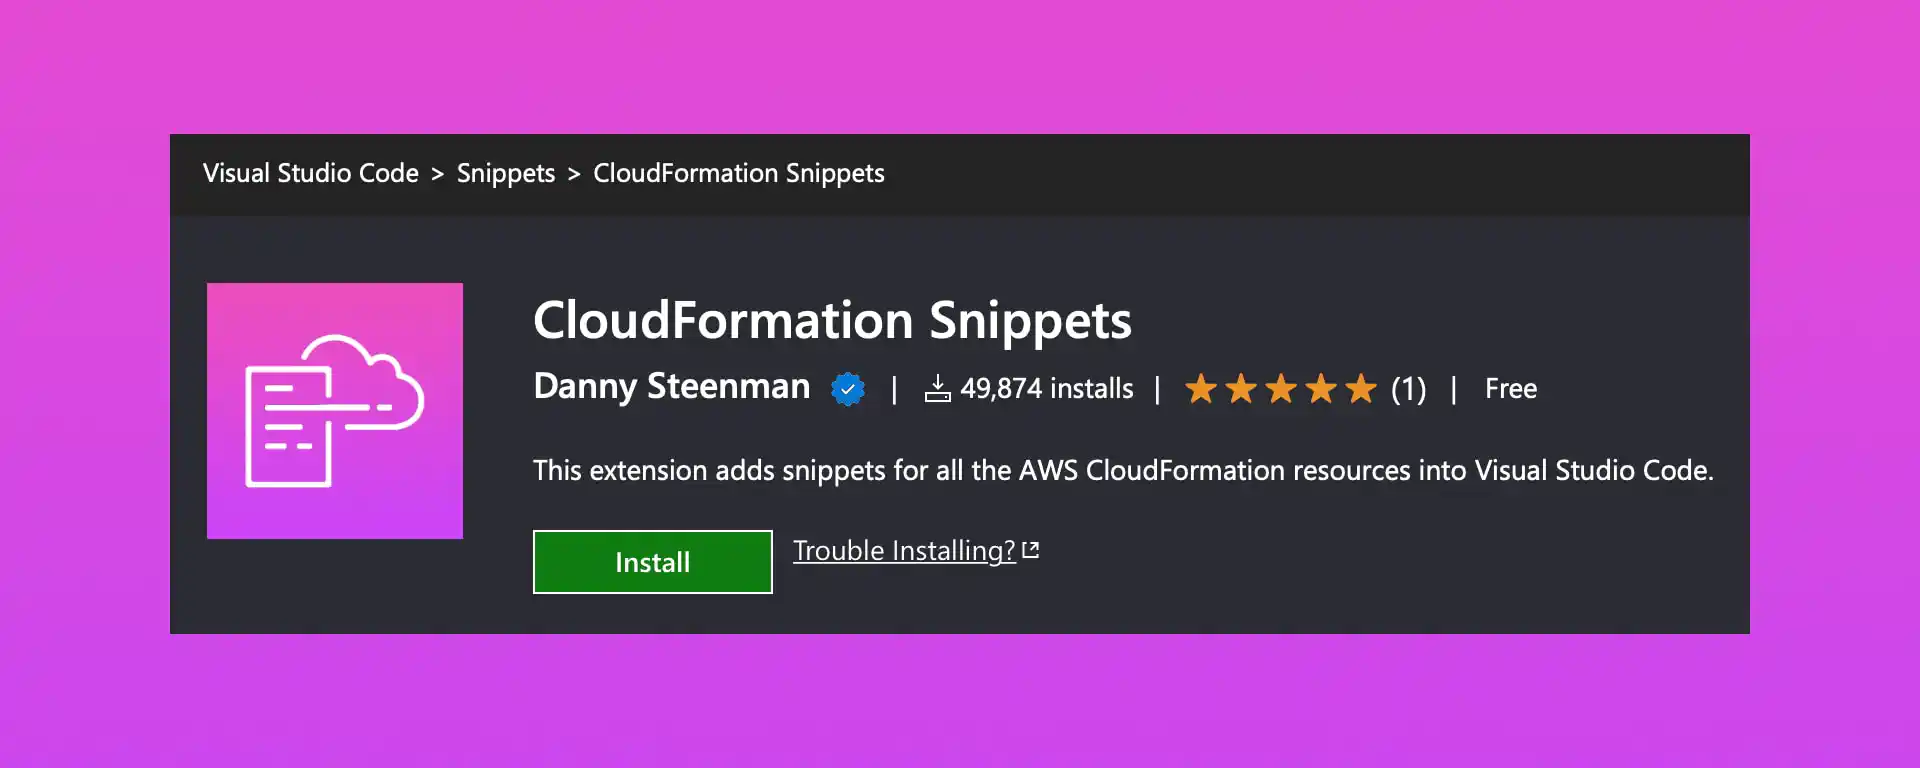 Autocomplete your CloudFormation Resources in VS Code